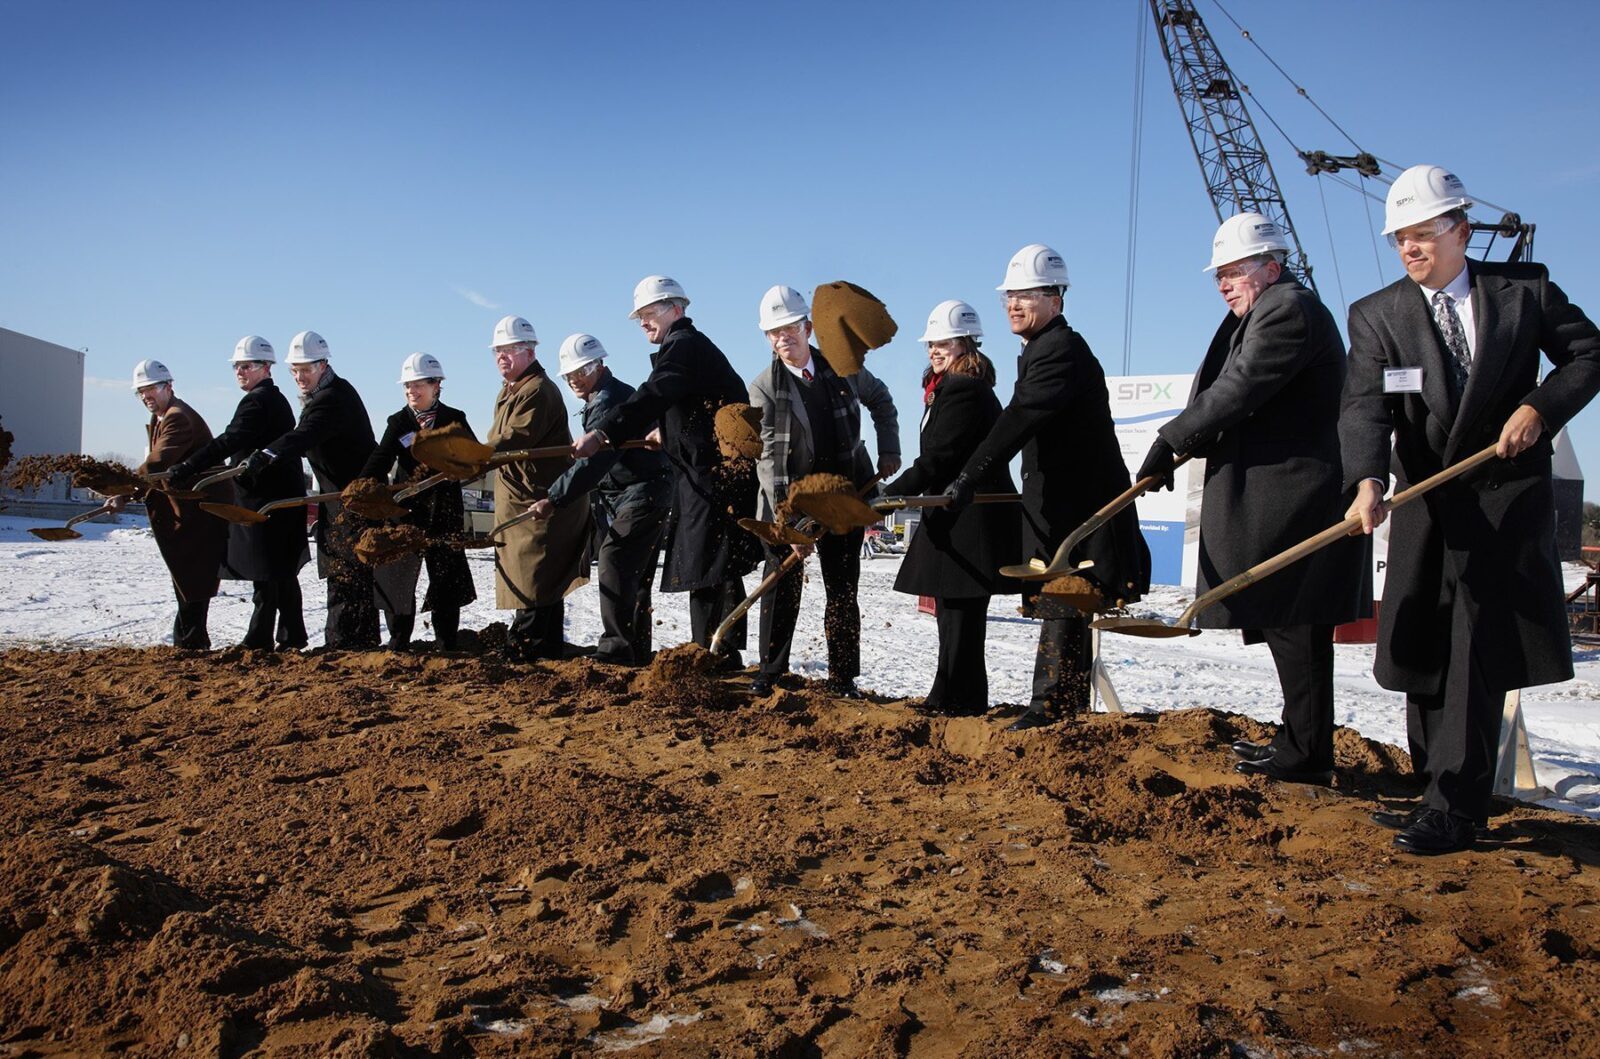 Large Power Facility Groundbreaking with shovels